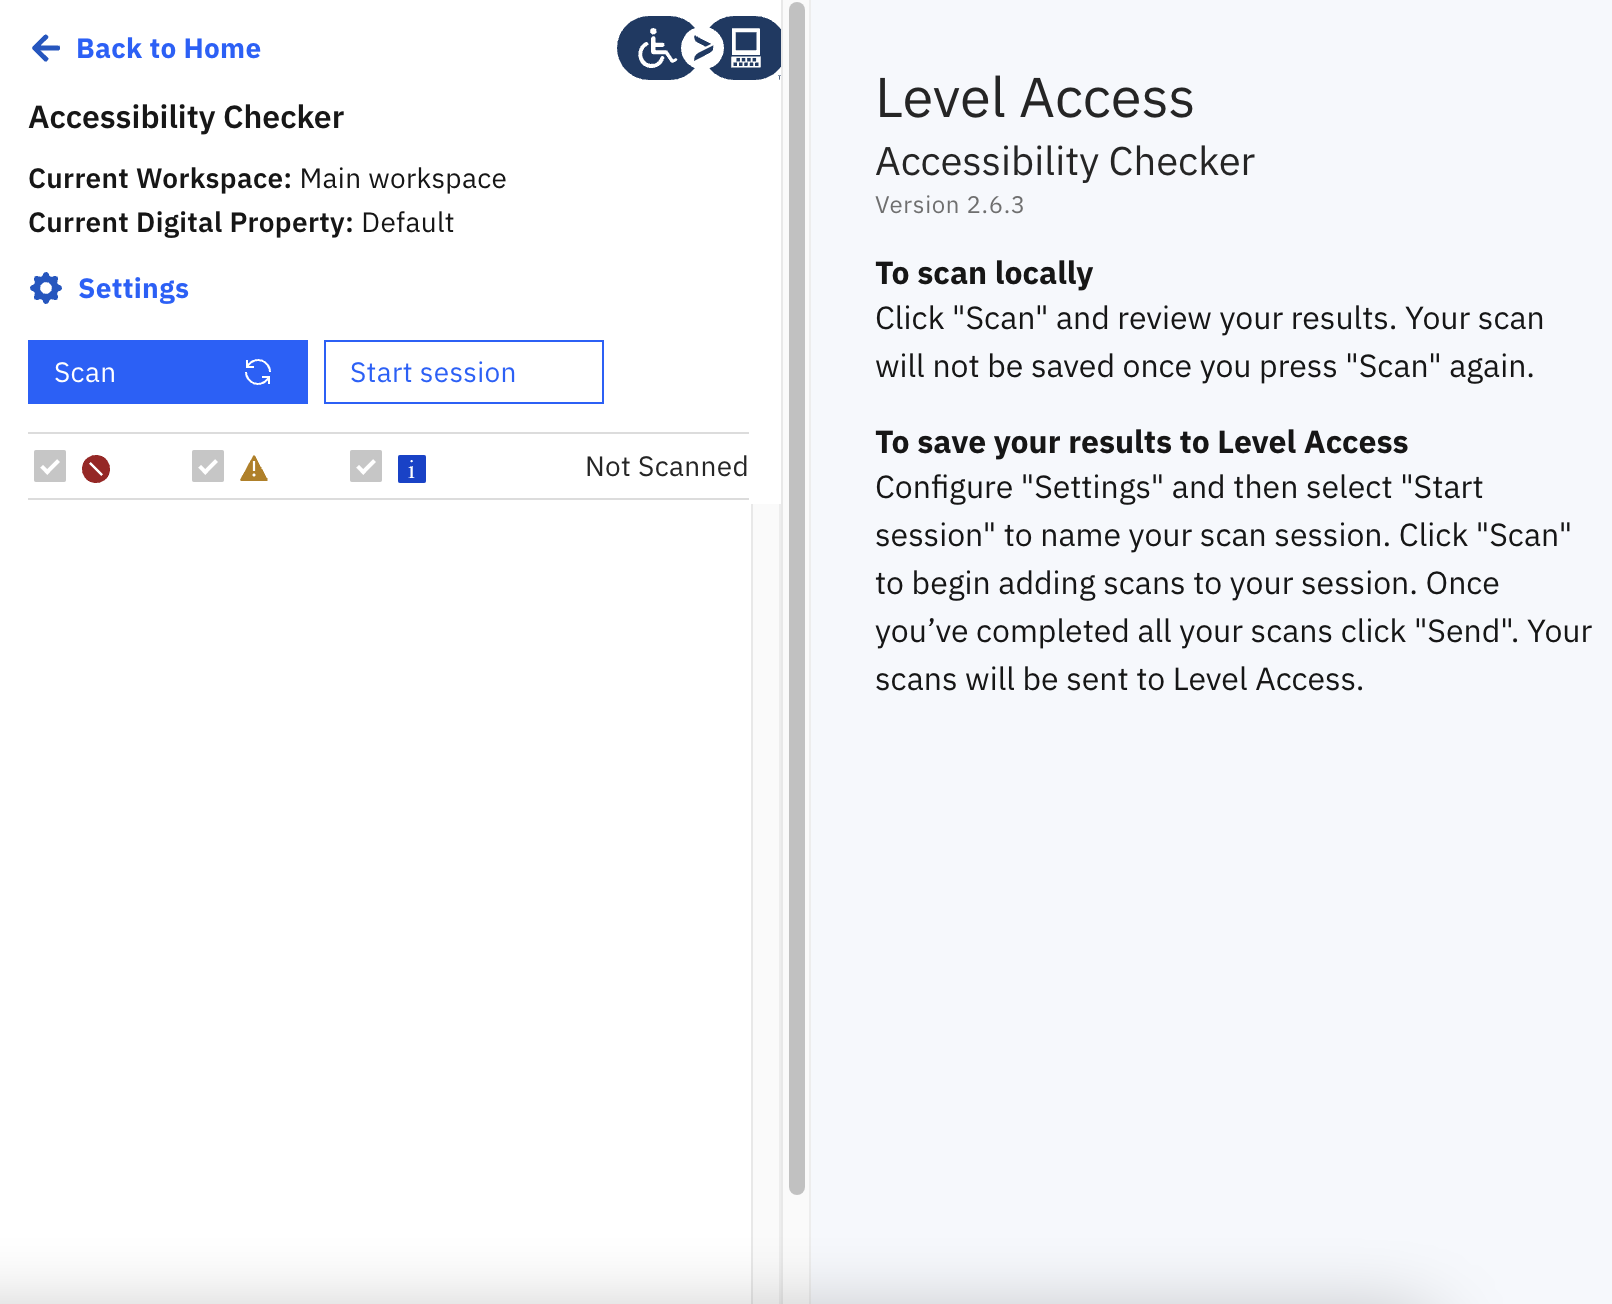 Level Access Accessibility Checker landing page.